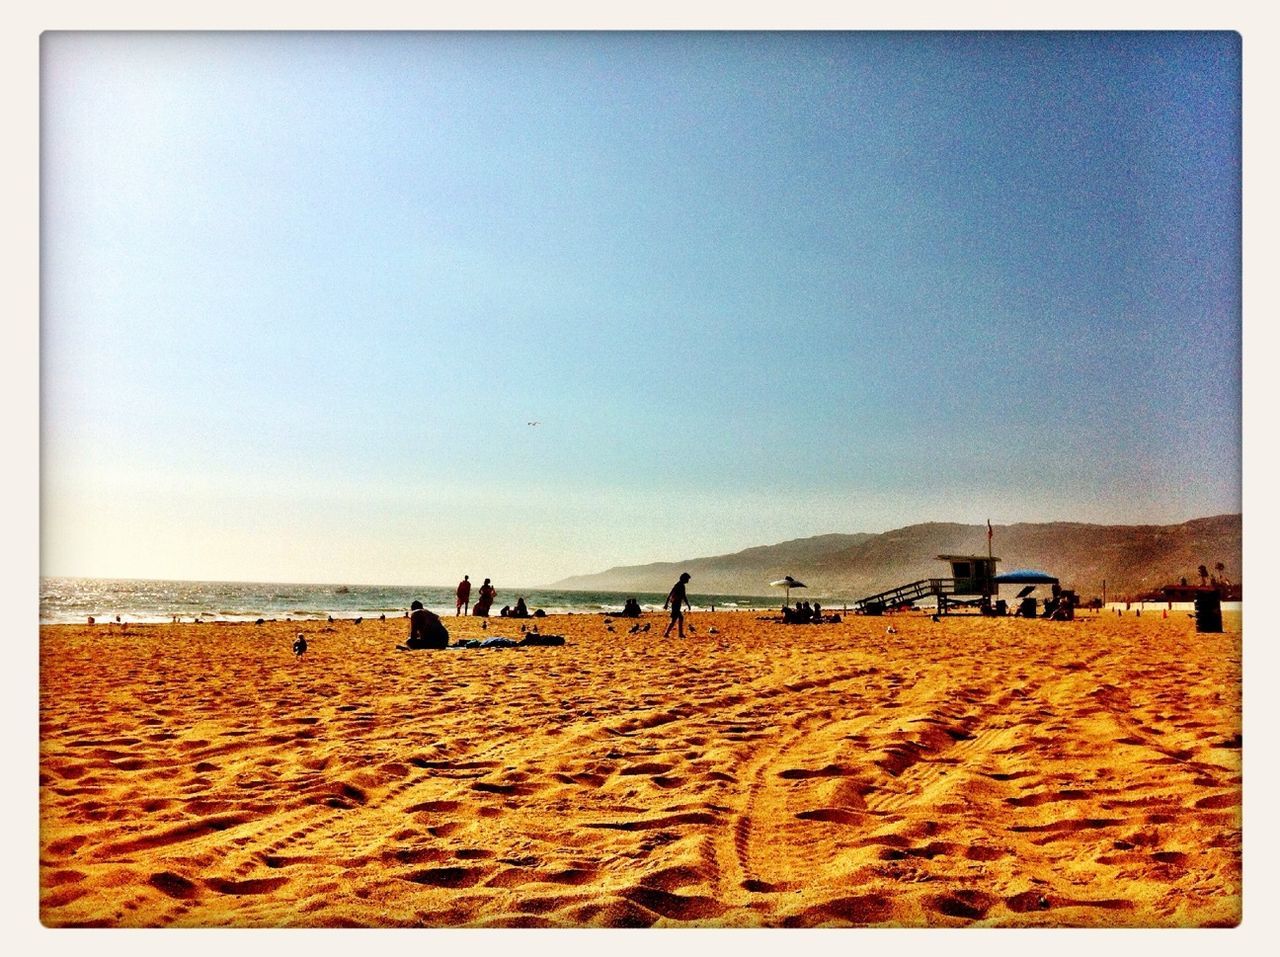 Surface level view of sand with people enjoying summer on zuma beach against clear sky